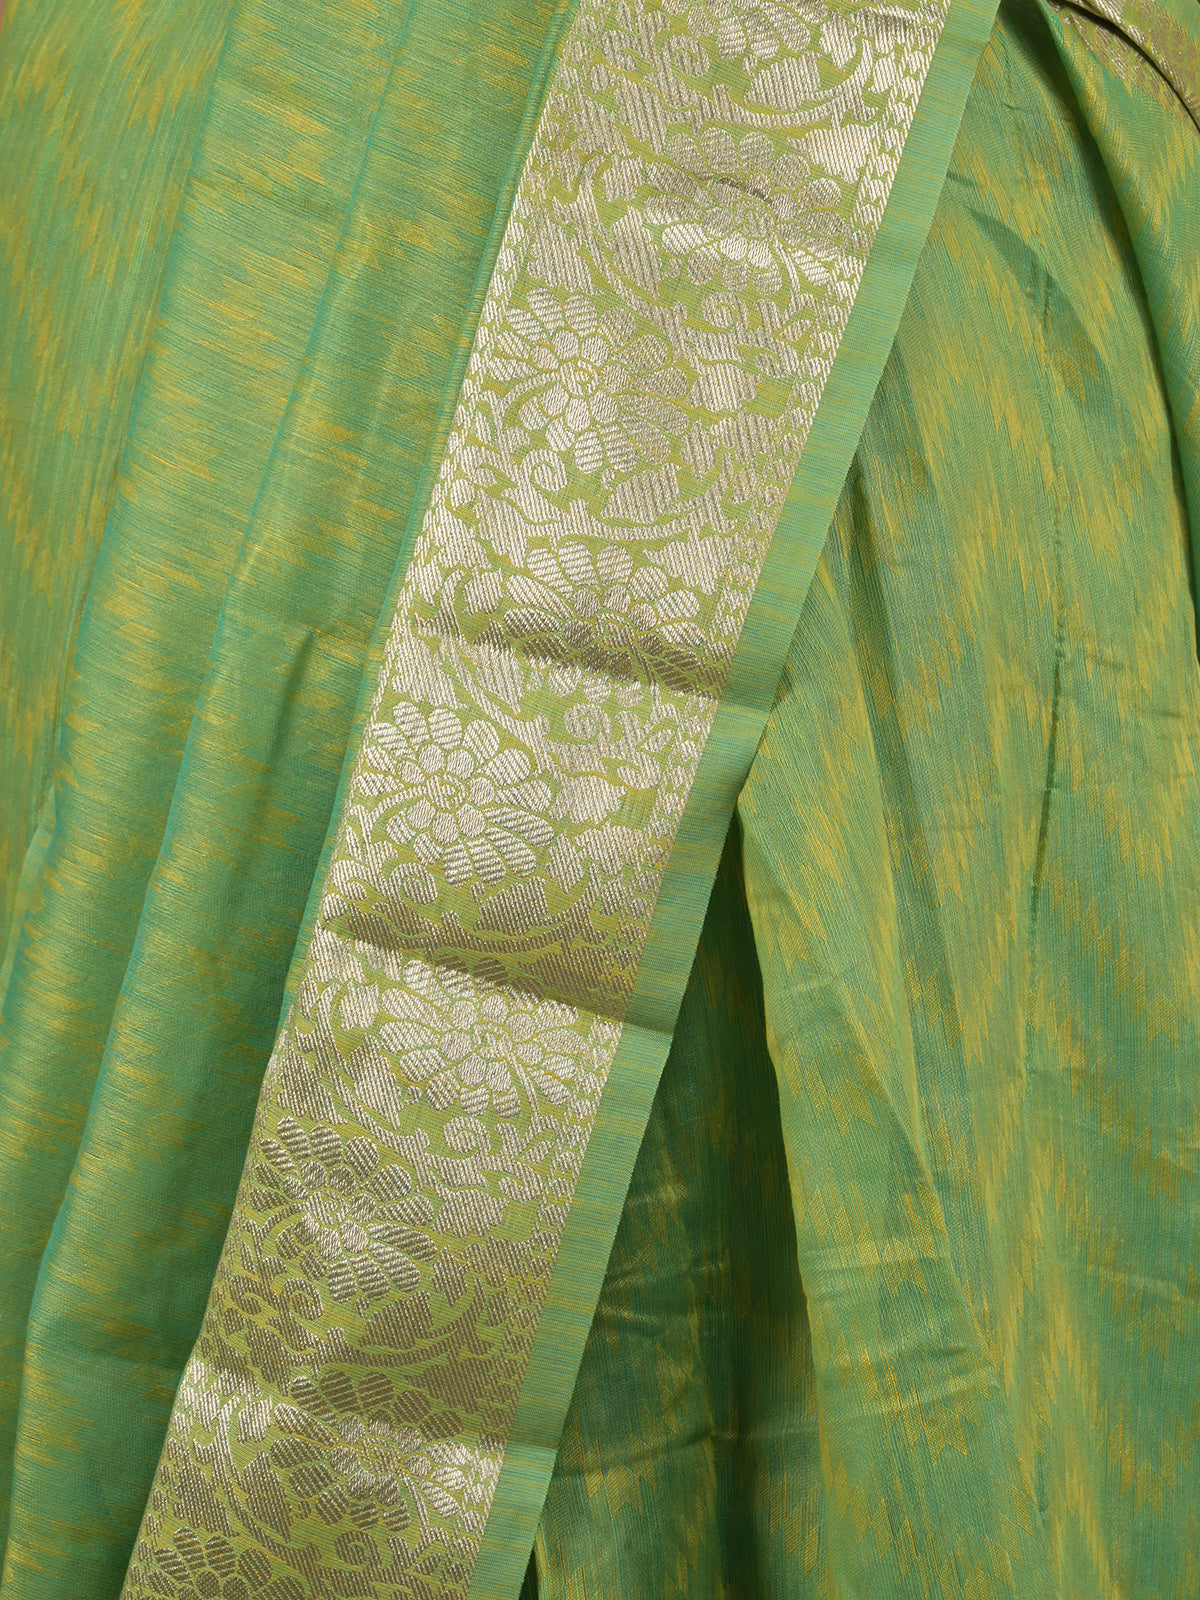 Odette Green Cotton Blend Woven Saree with Unstitched Blouse for Women